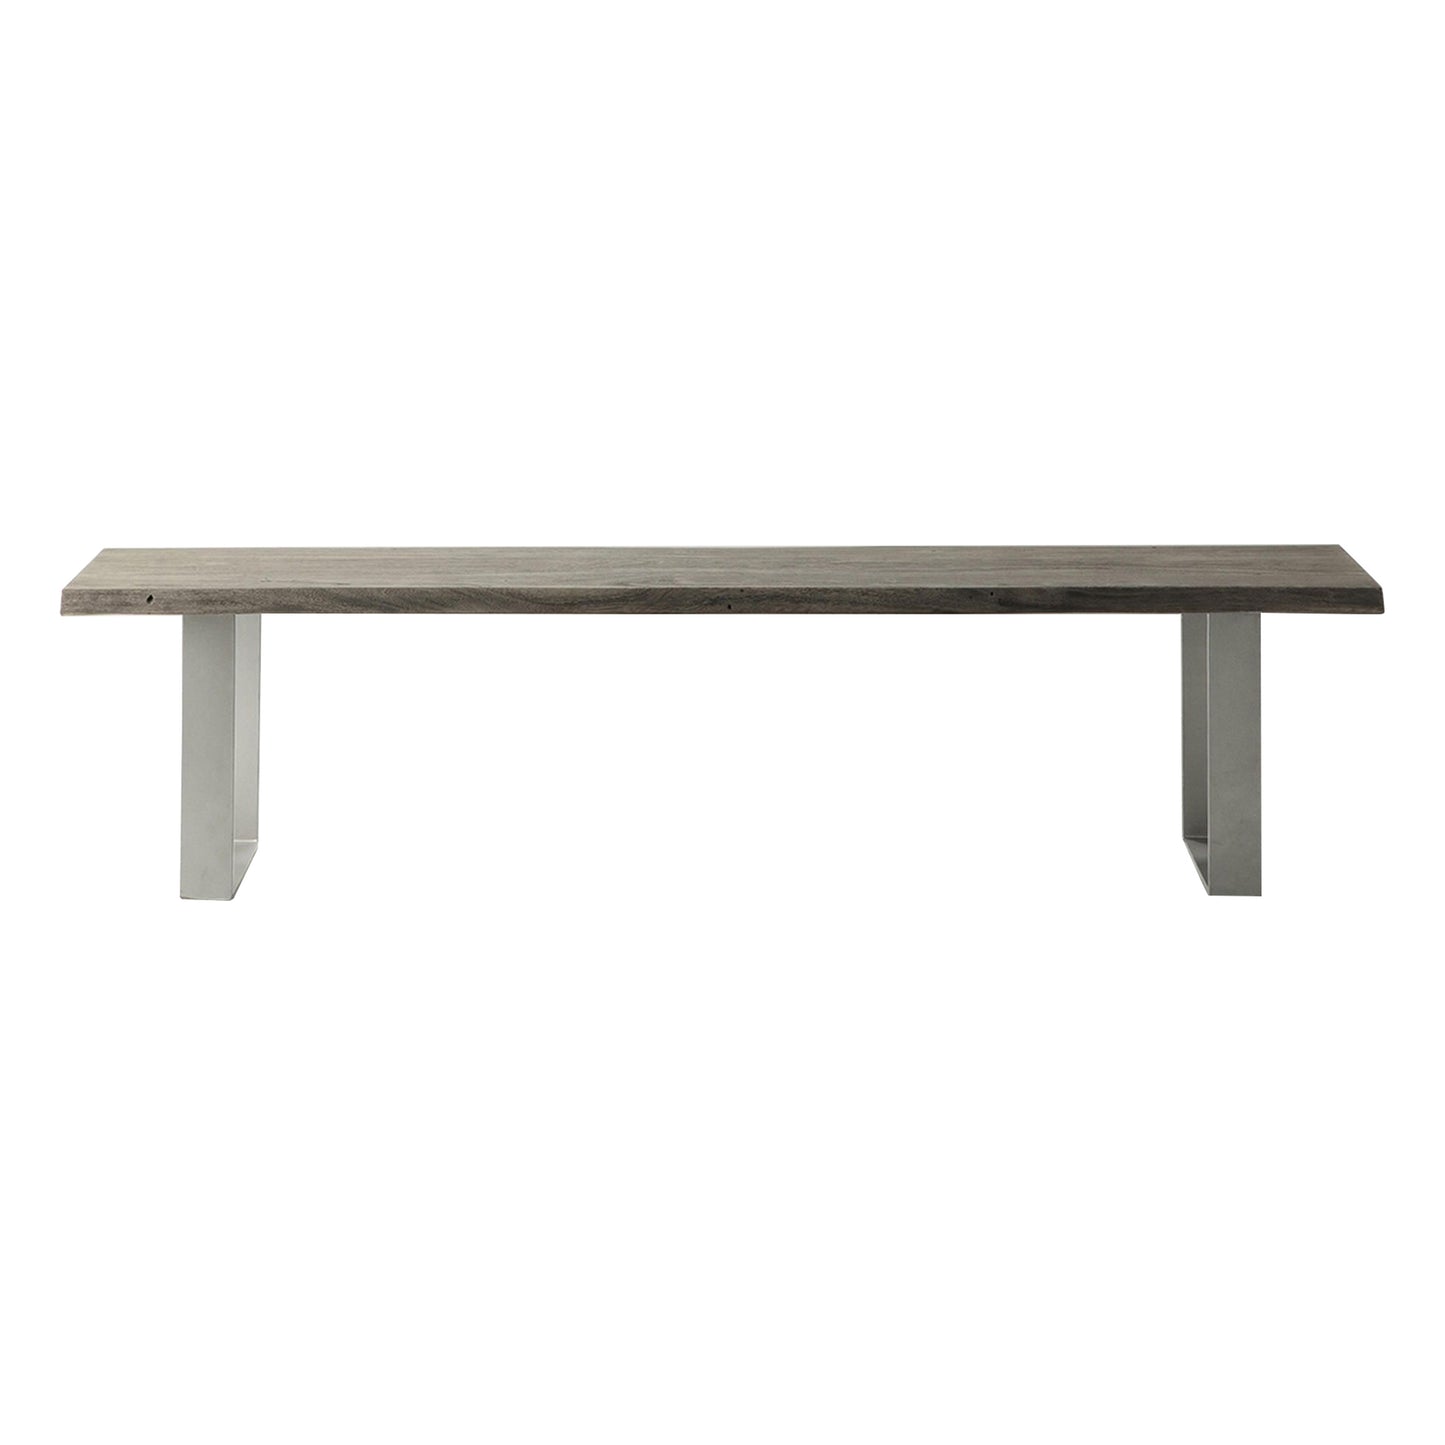 A grey Southpool dining bench with a metal base for home furniture and interior decor.